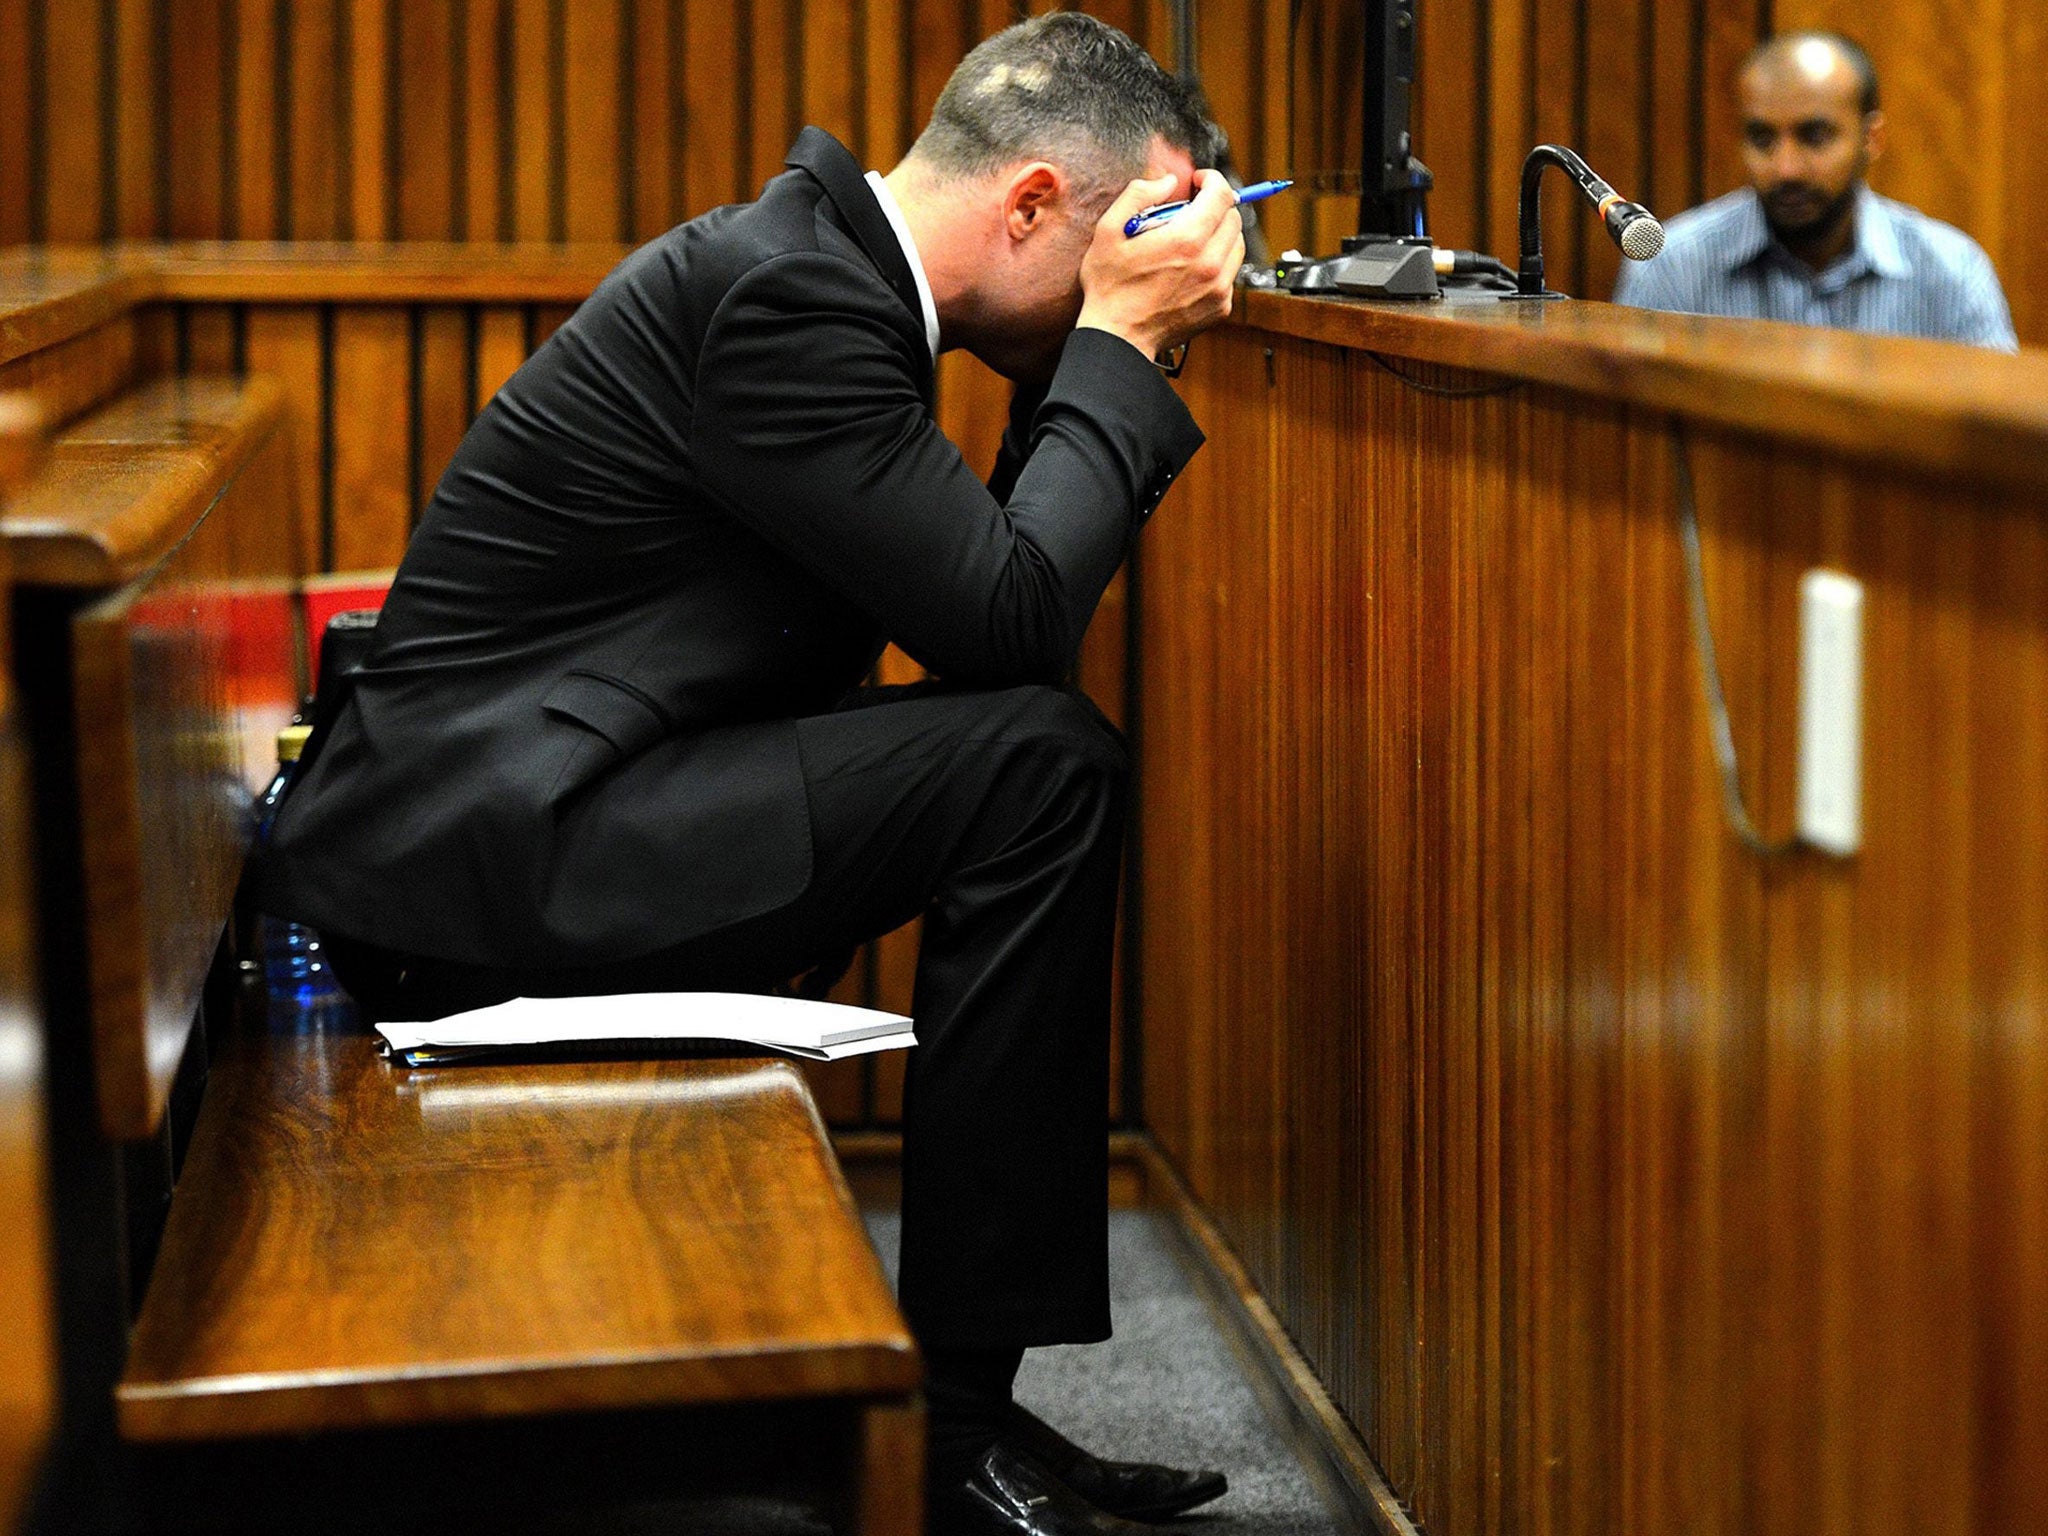 Oscar Pistorius sits in the dock at the high court in Pretoria